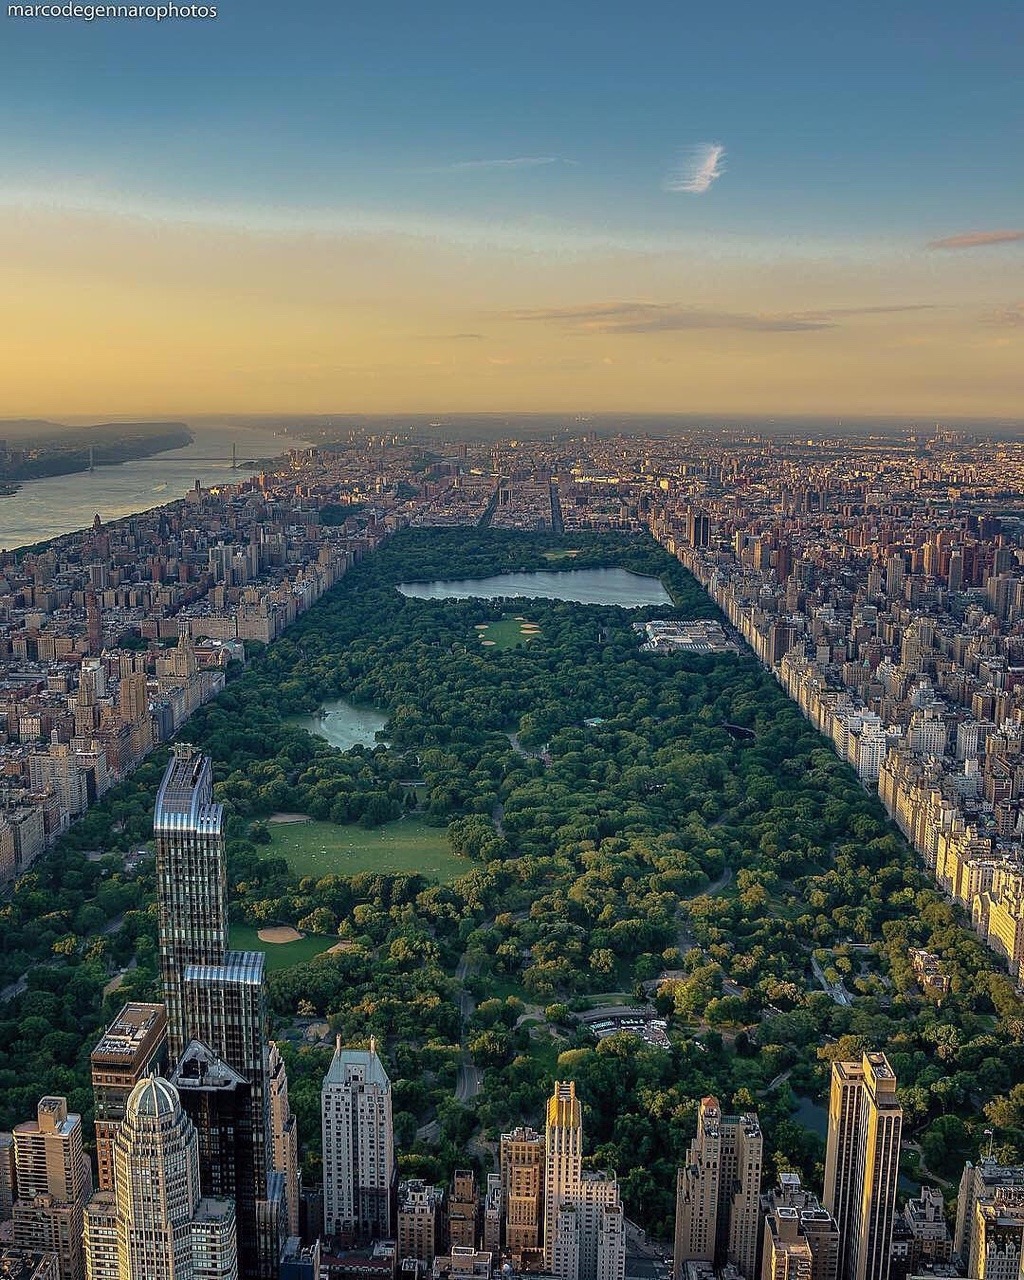 Central Park from above by Marco Degennaro Photos